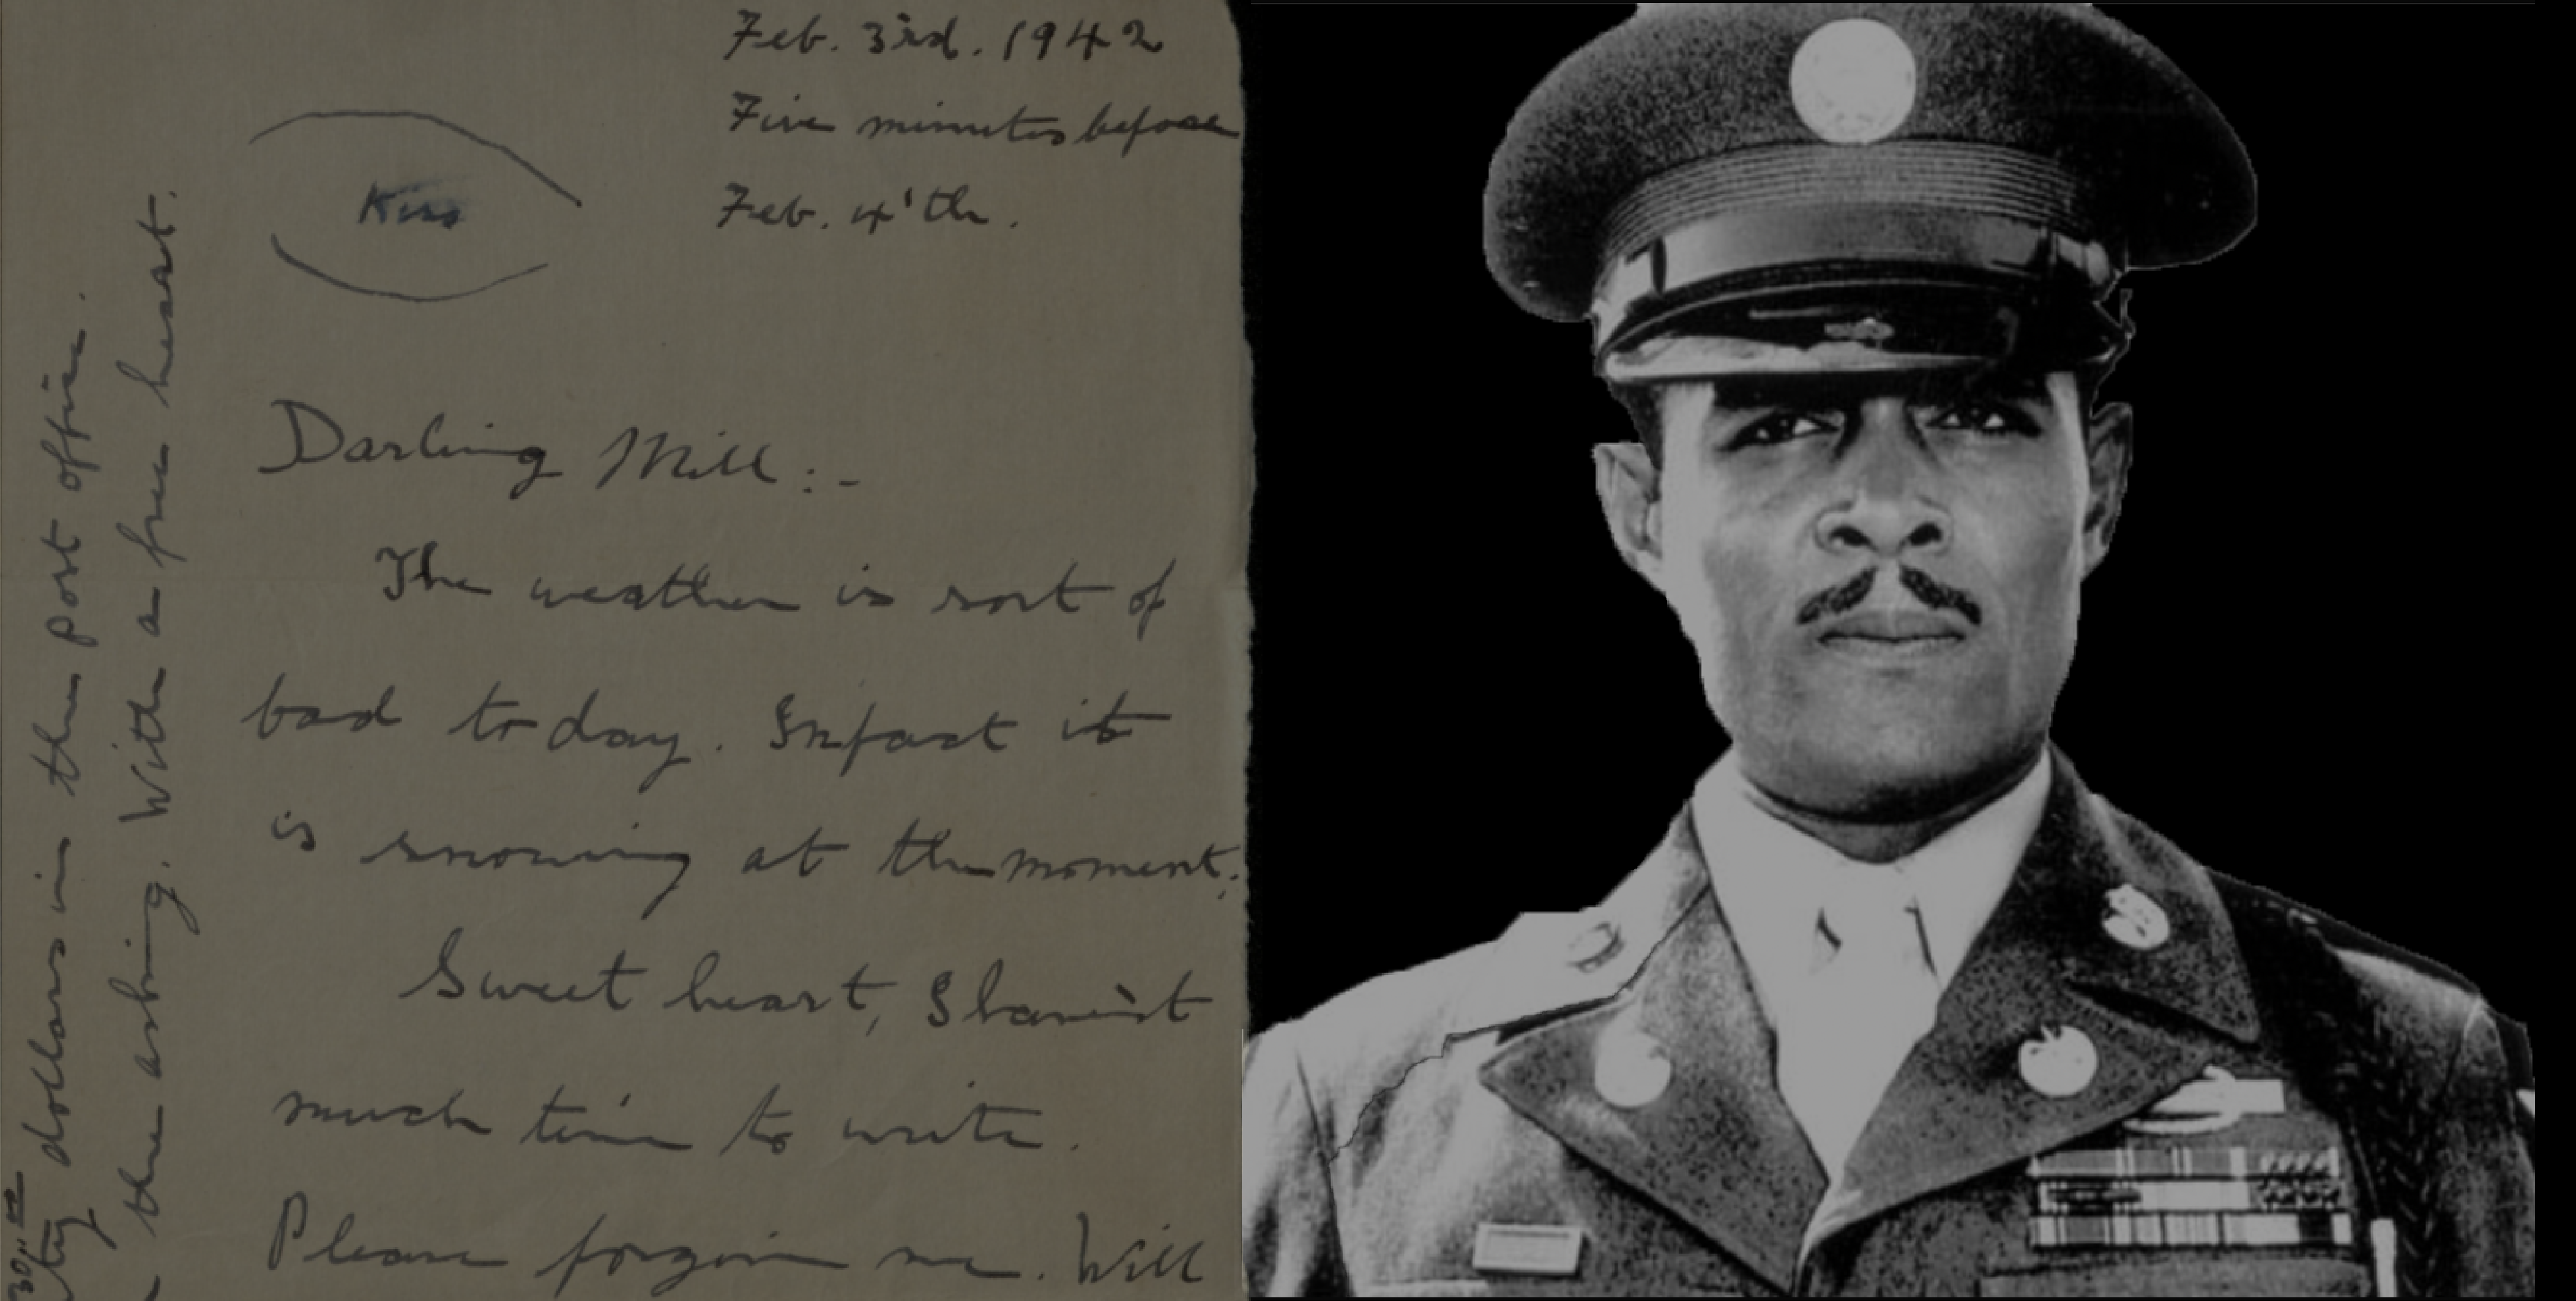 Yours Beyond the End: Love Letters From a Truck Driver and Congressional Medal of Honor Winner